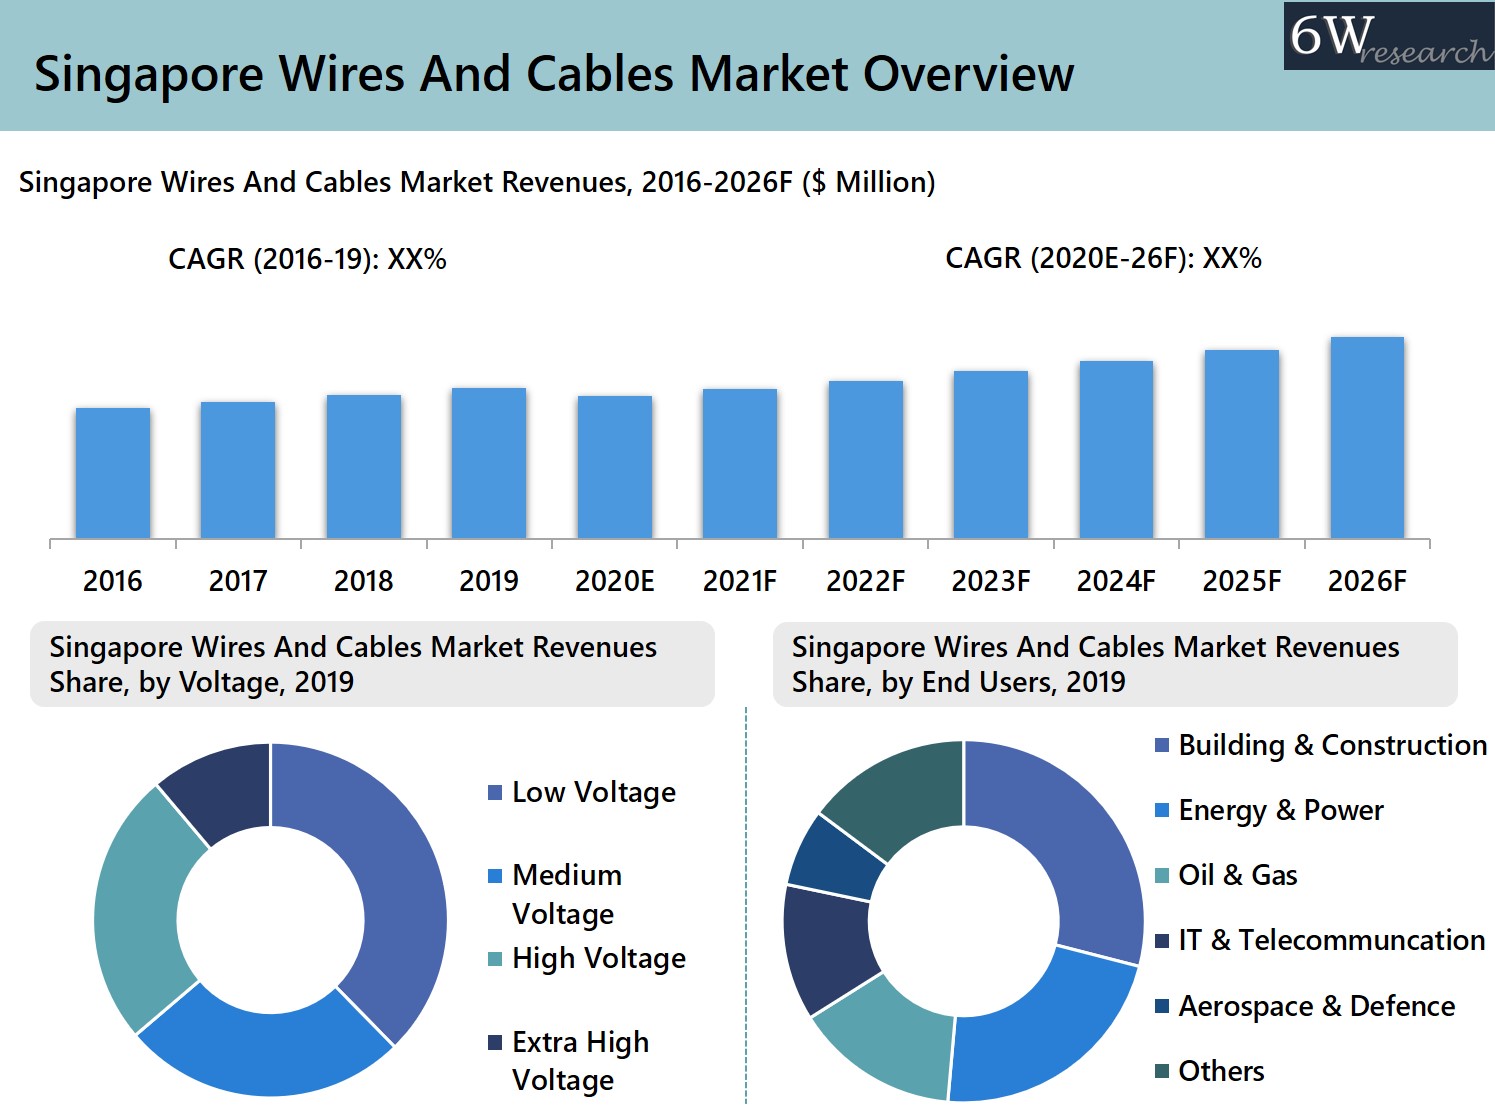 Singapore Wires And Cables Market